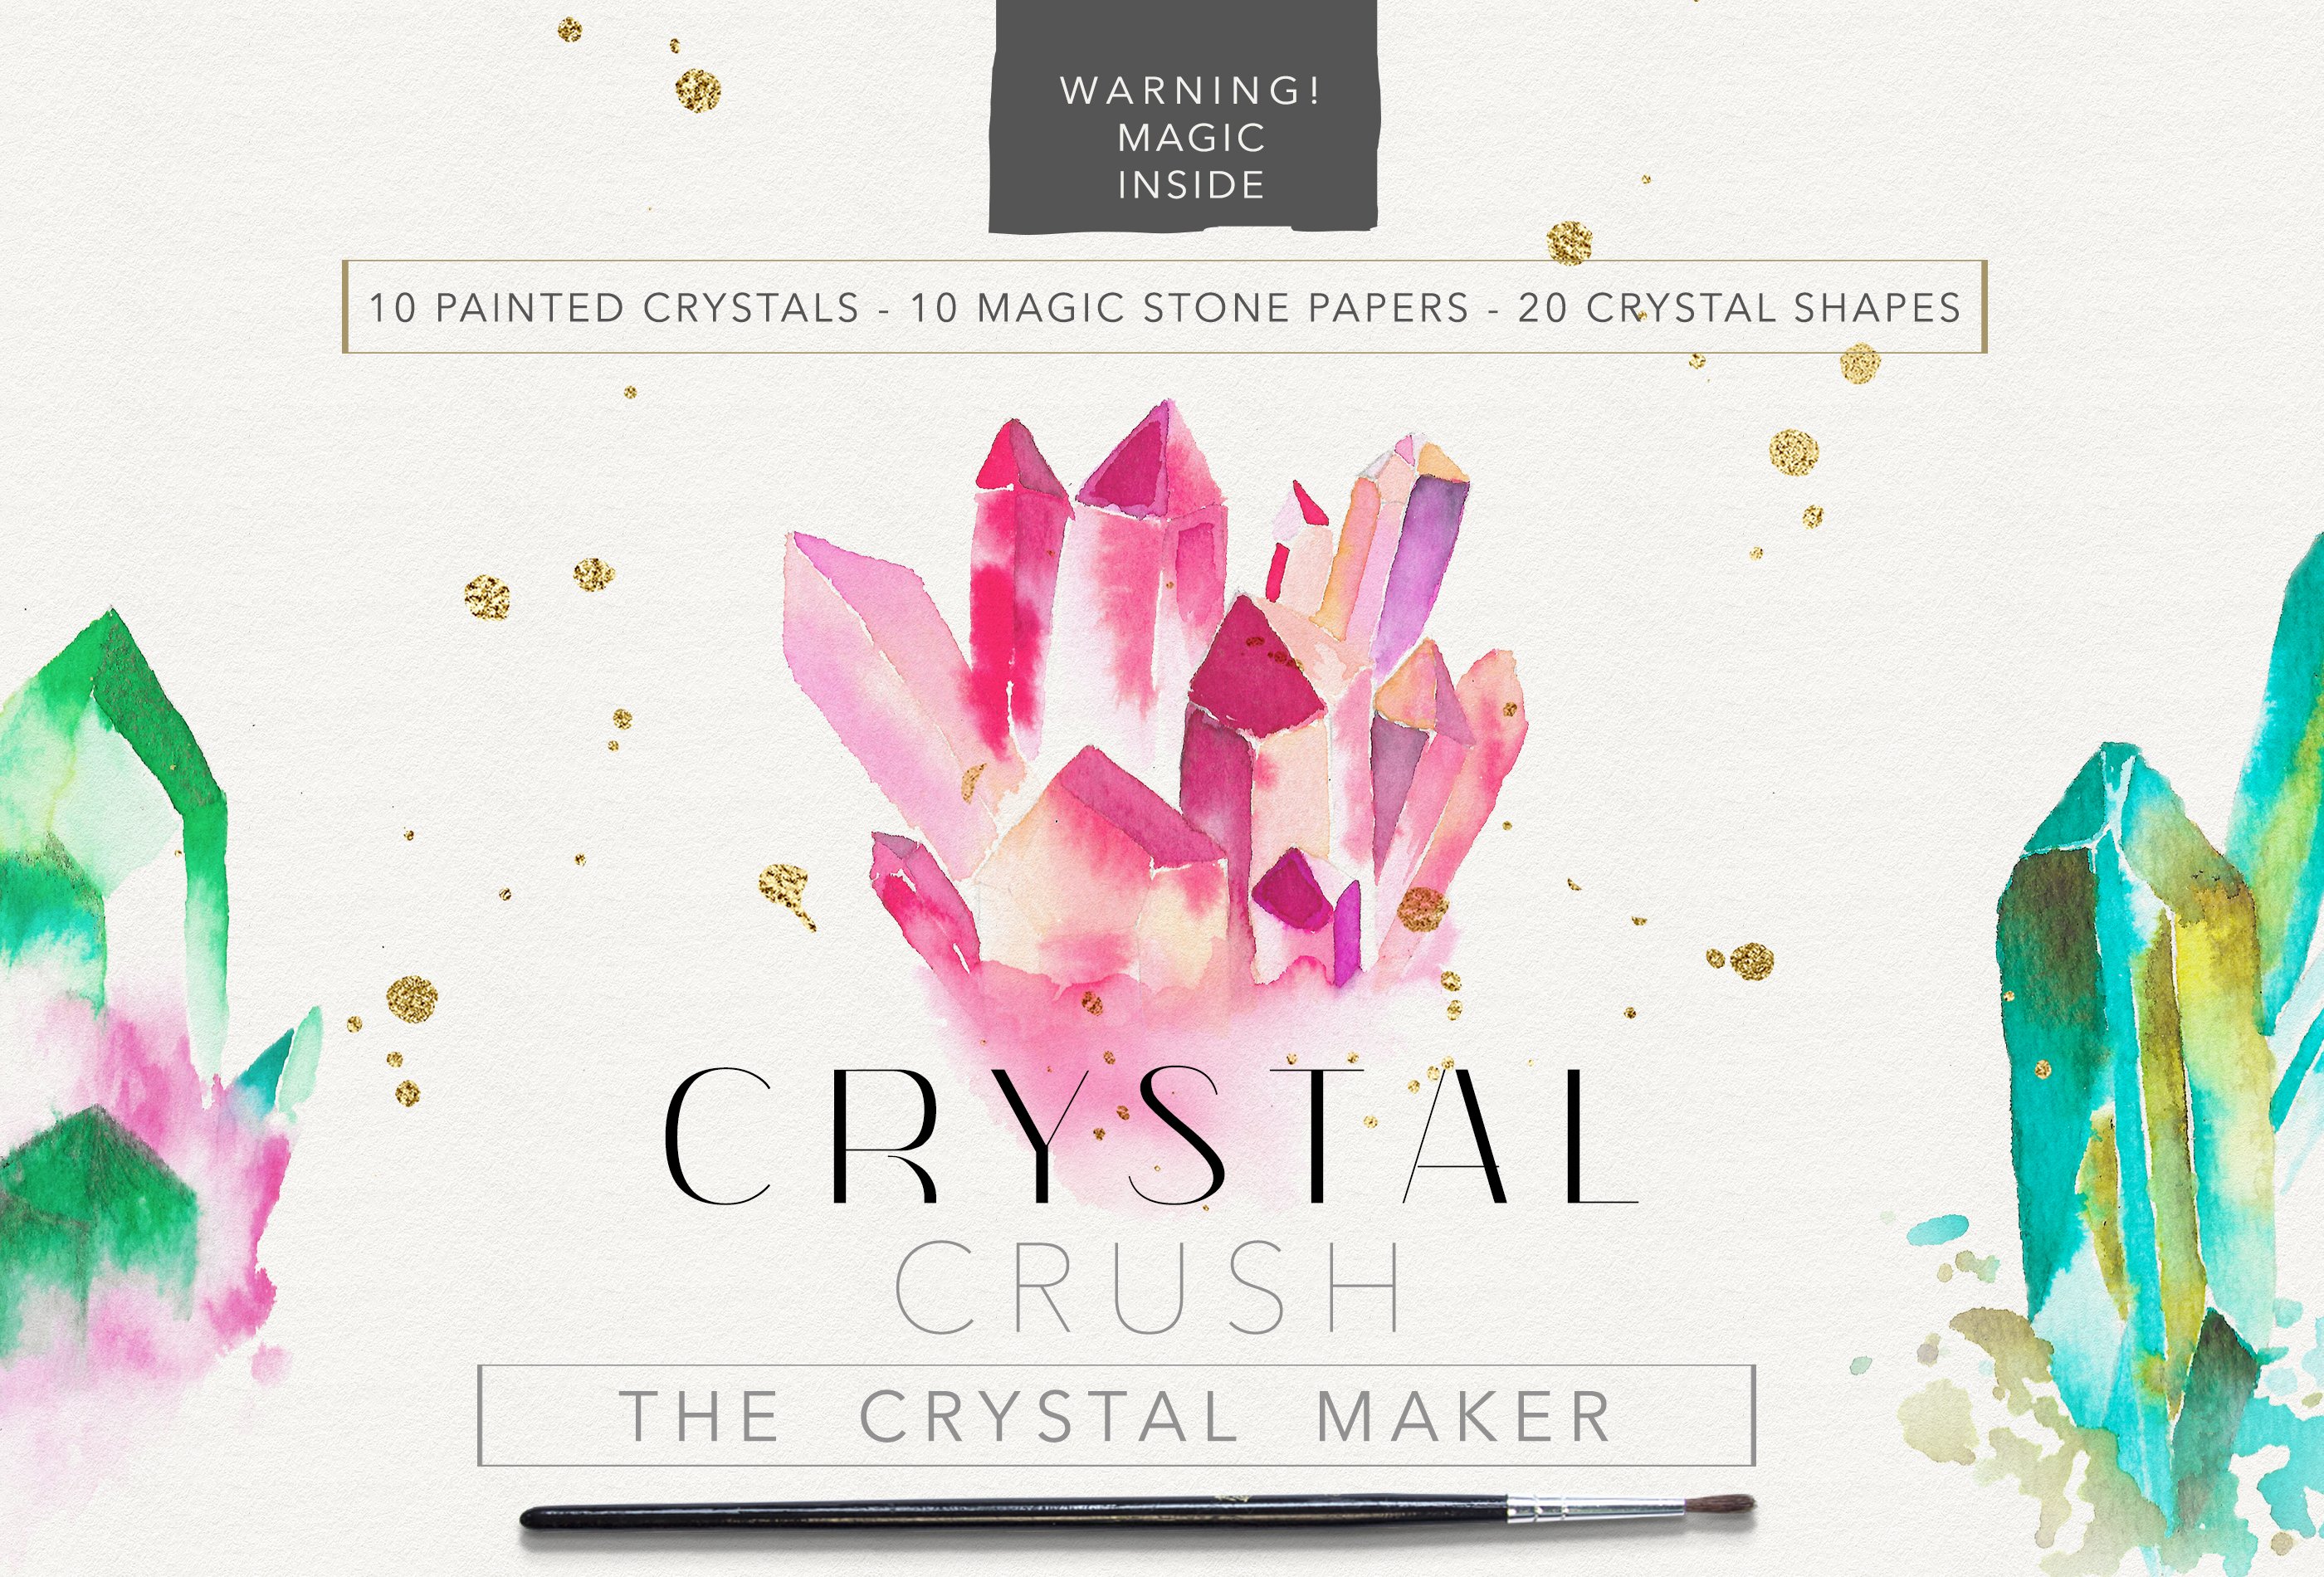 Crystal Crush - the crystal maker cover image.